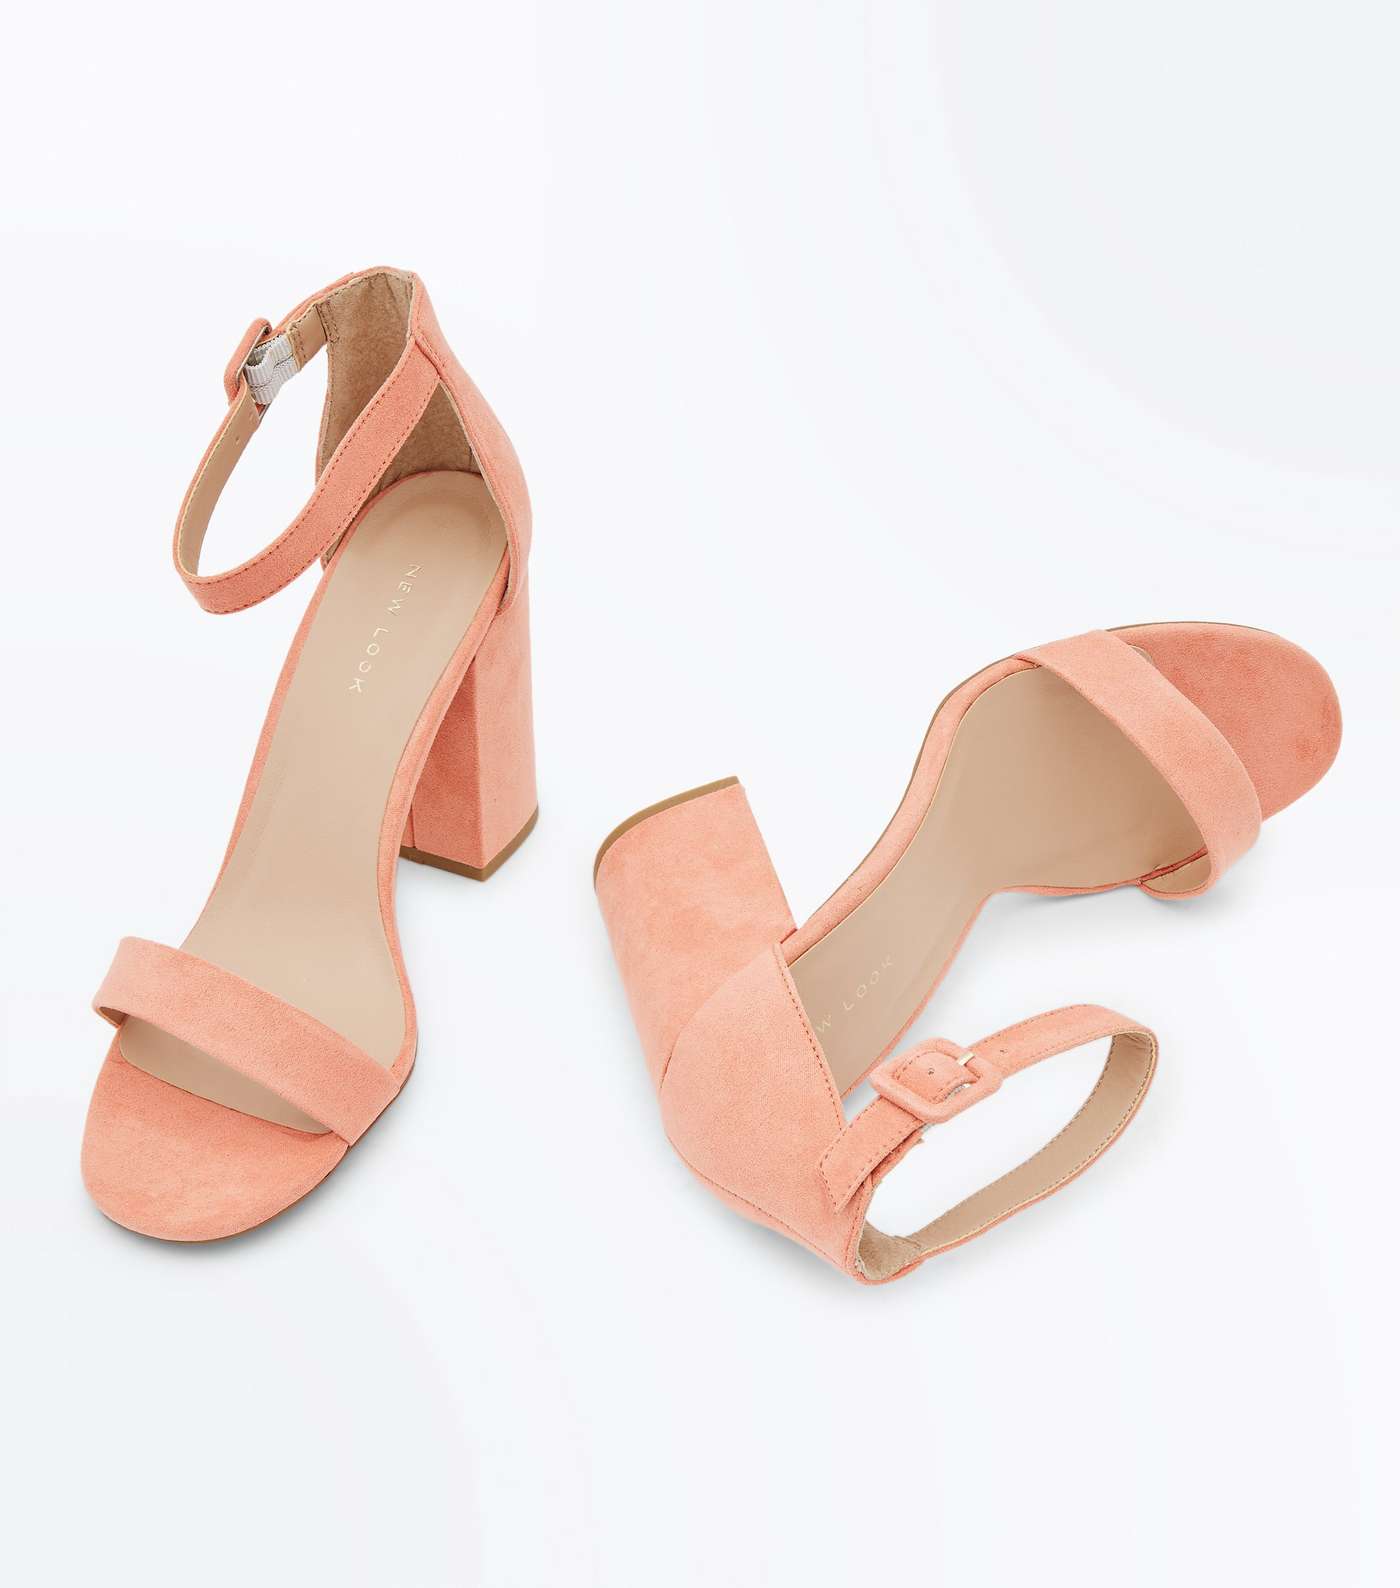 Coral Suedette Barely There Block Heels Image 4